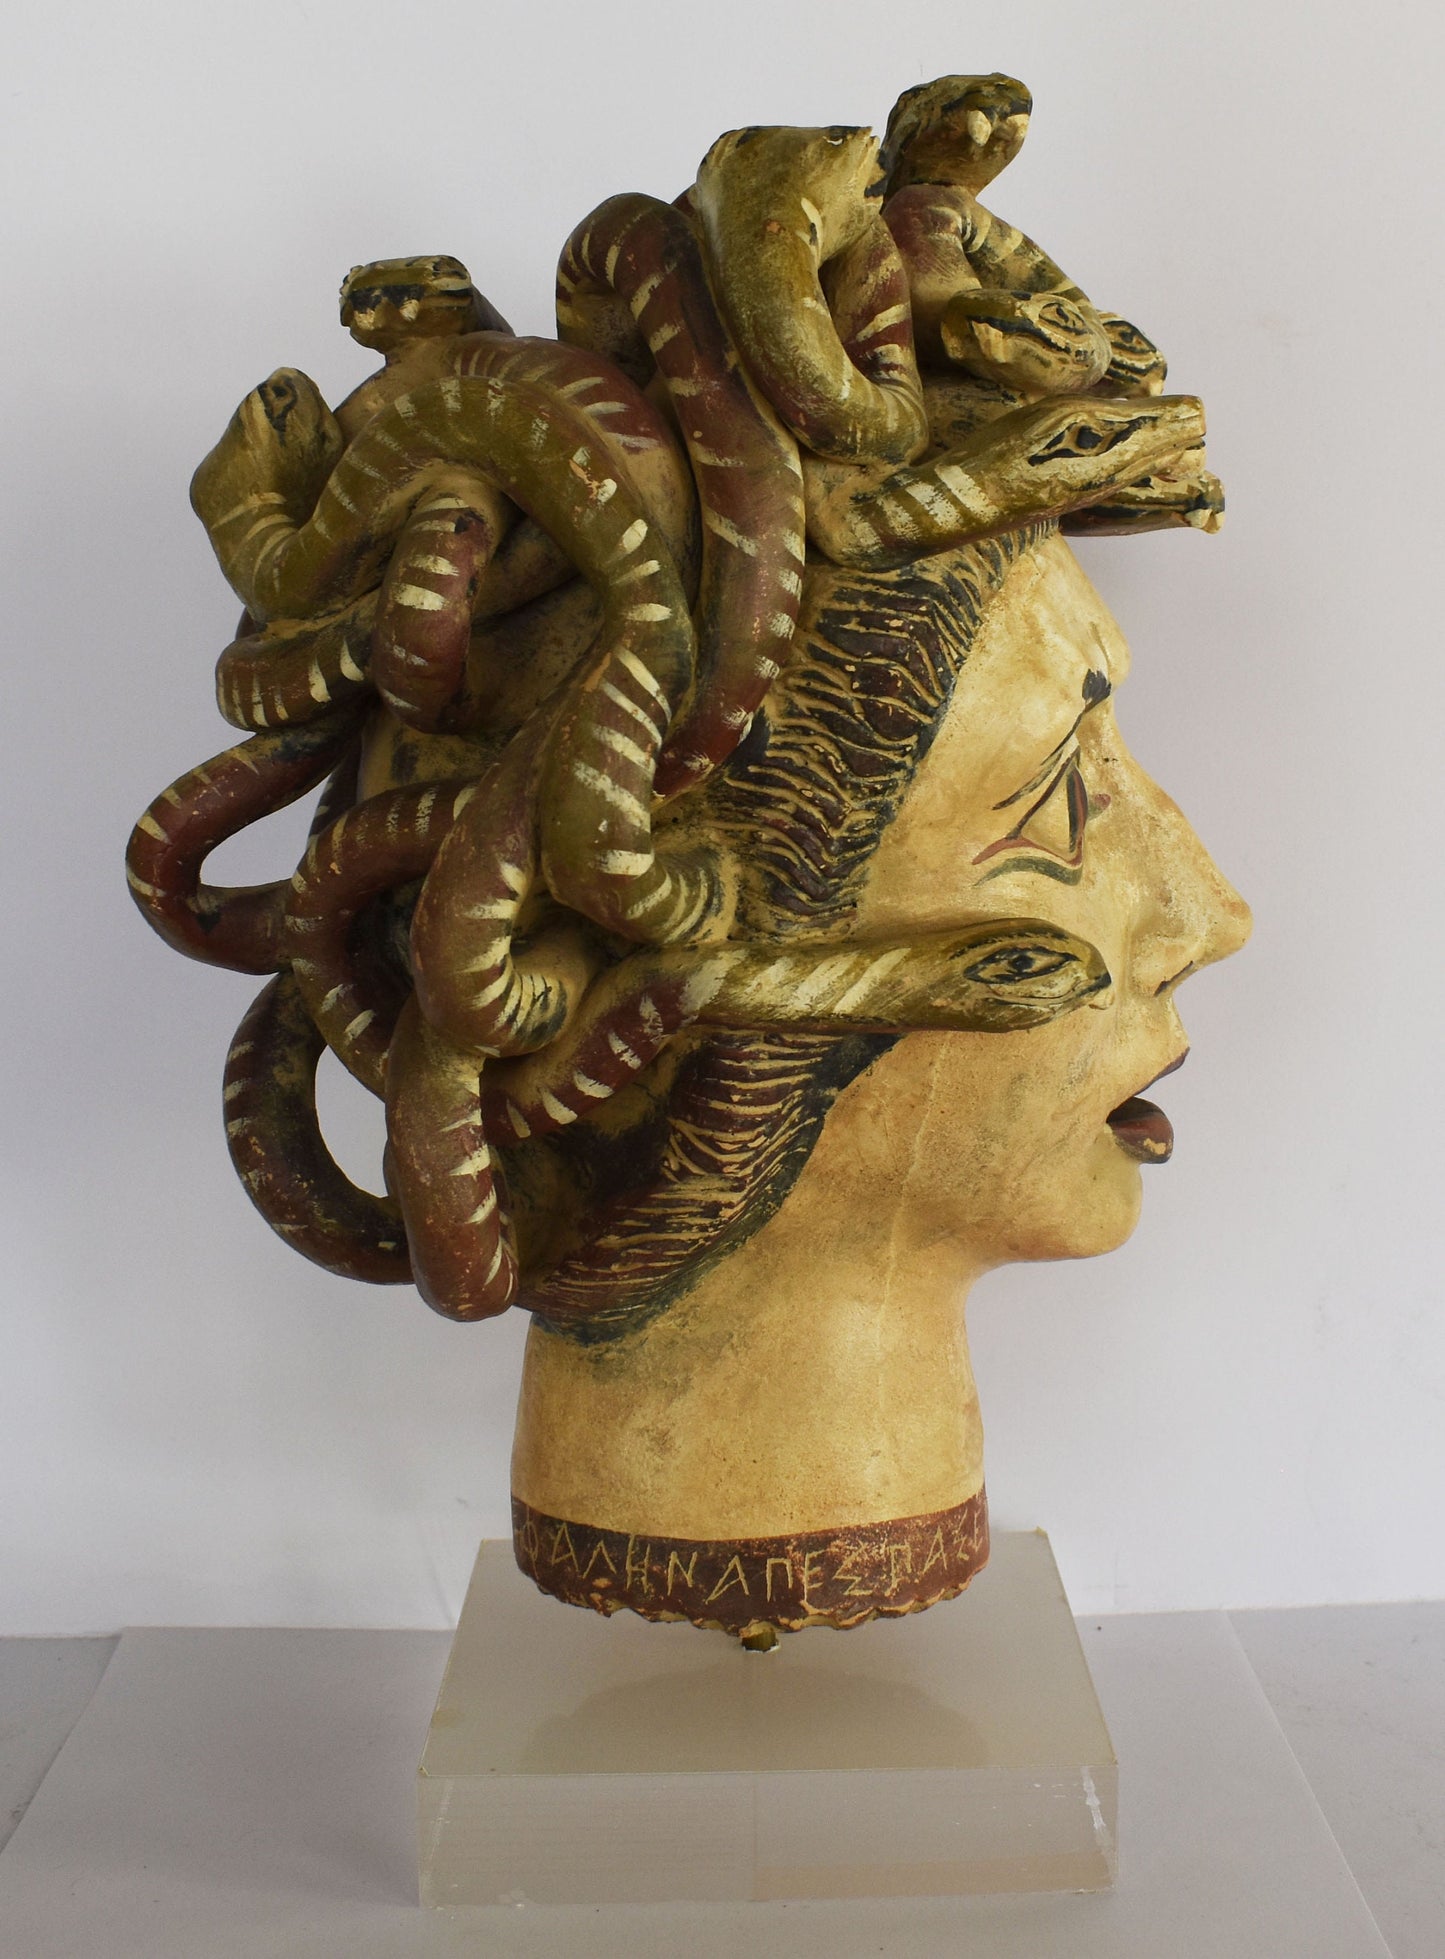 Medusa Head - Snake-Haired Gorgon - Symbol of natural cycle of birth, death and rebirth - Plexiglass Base - Ceramic Artifact